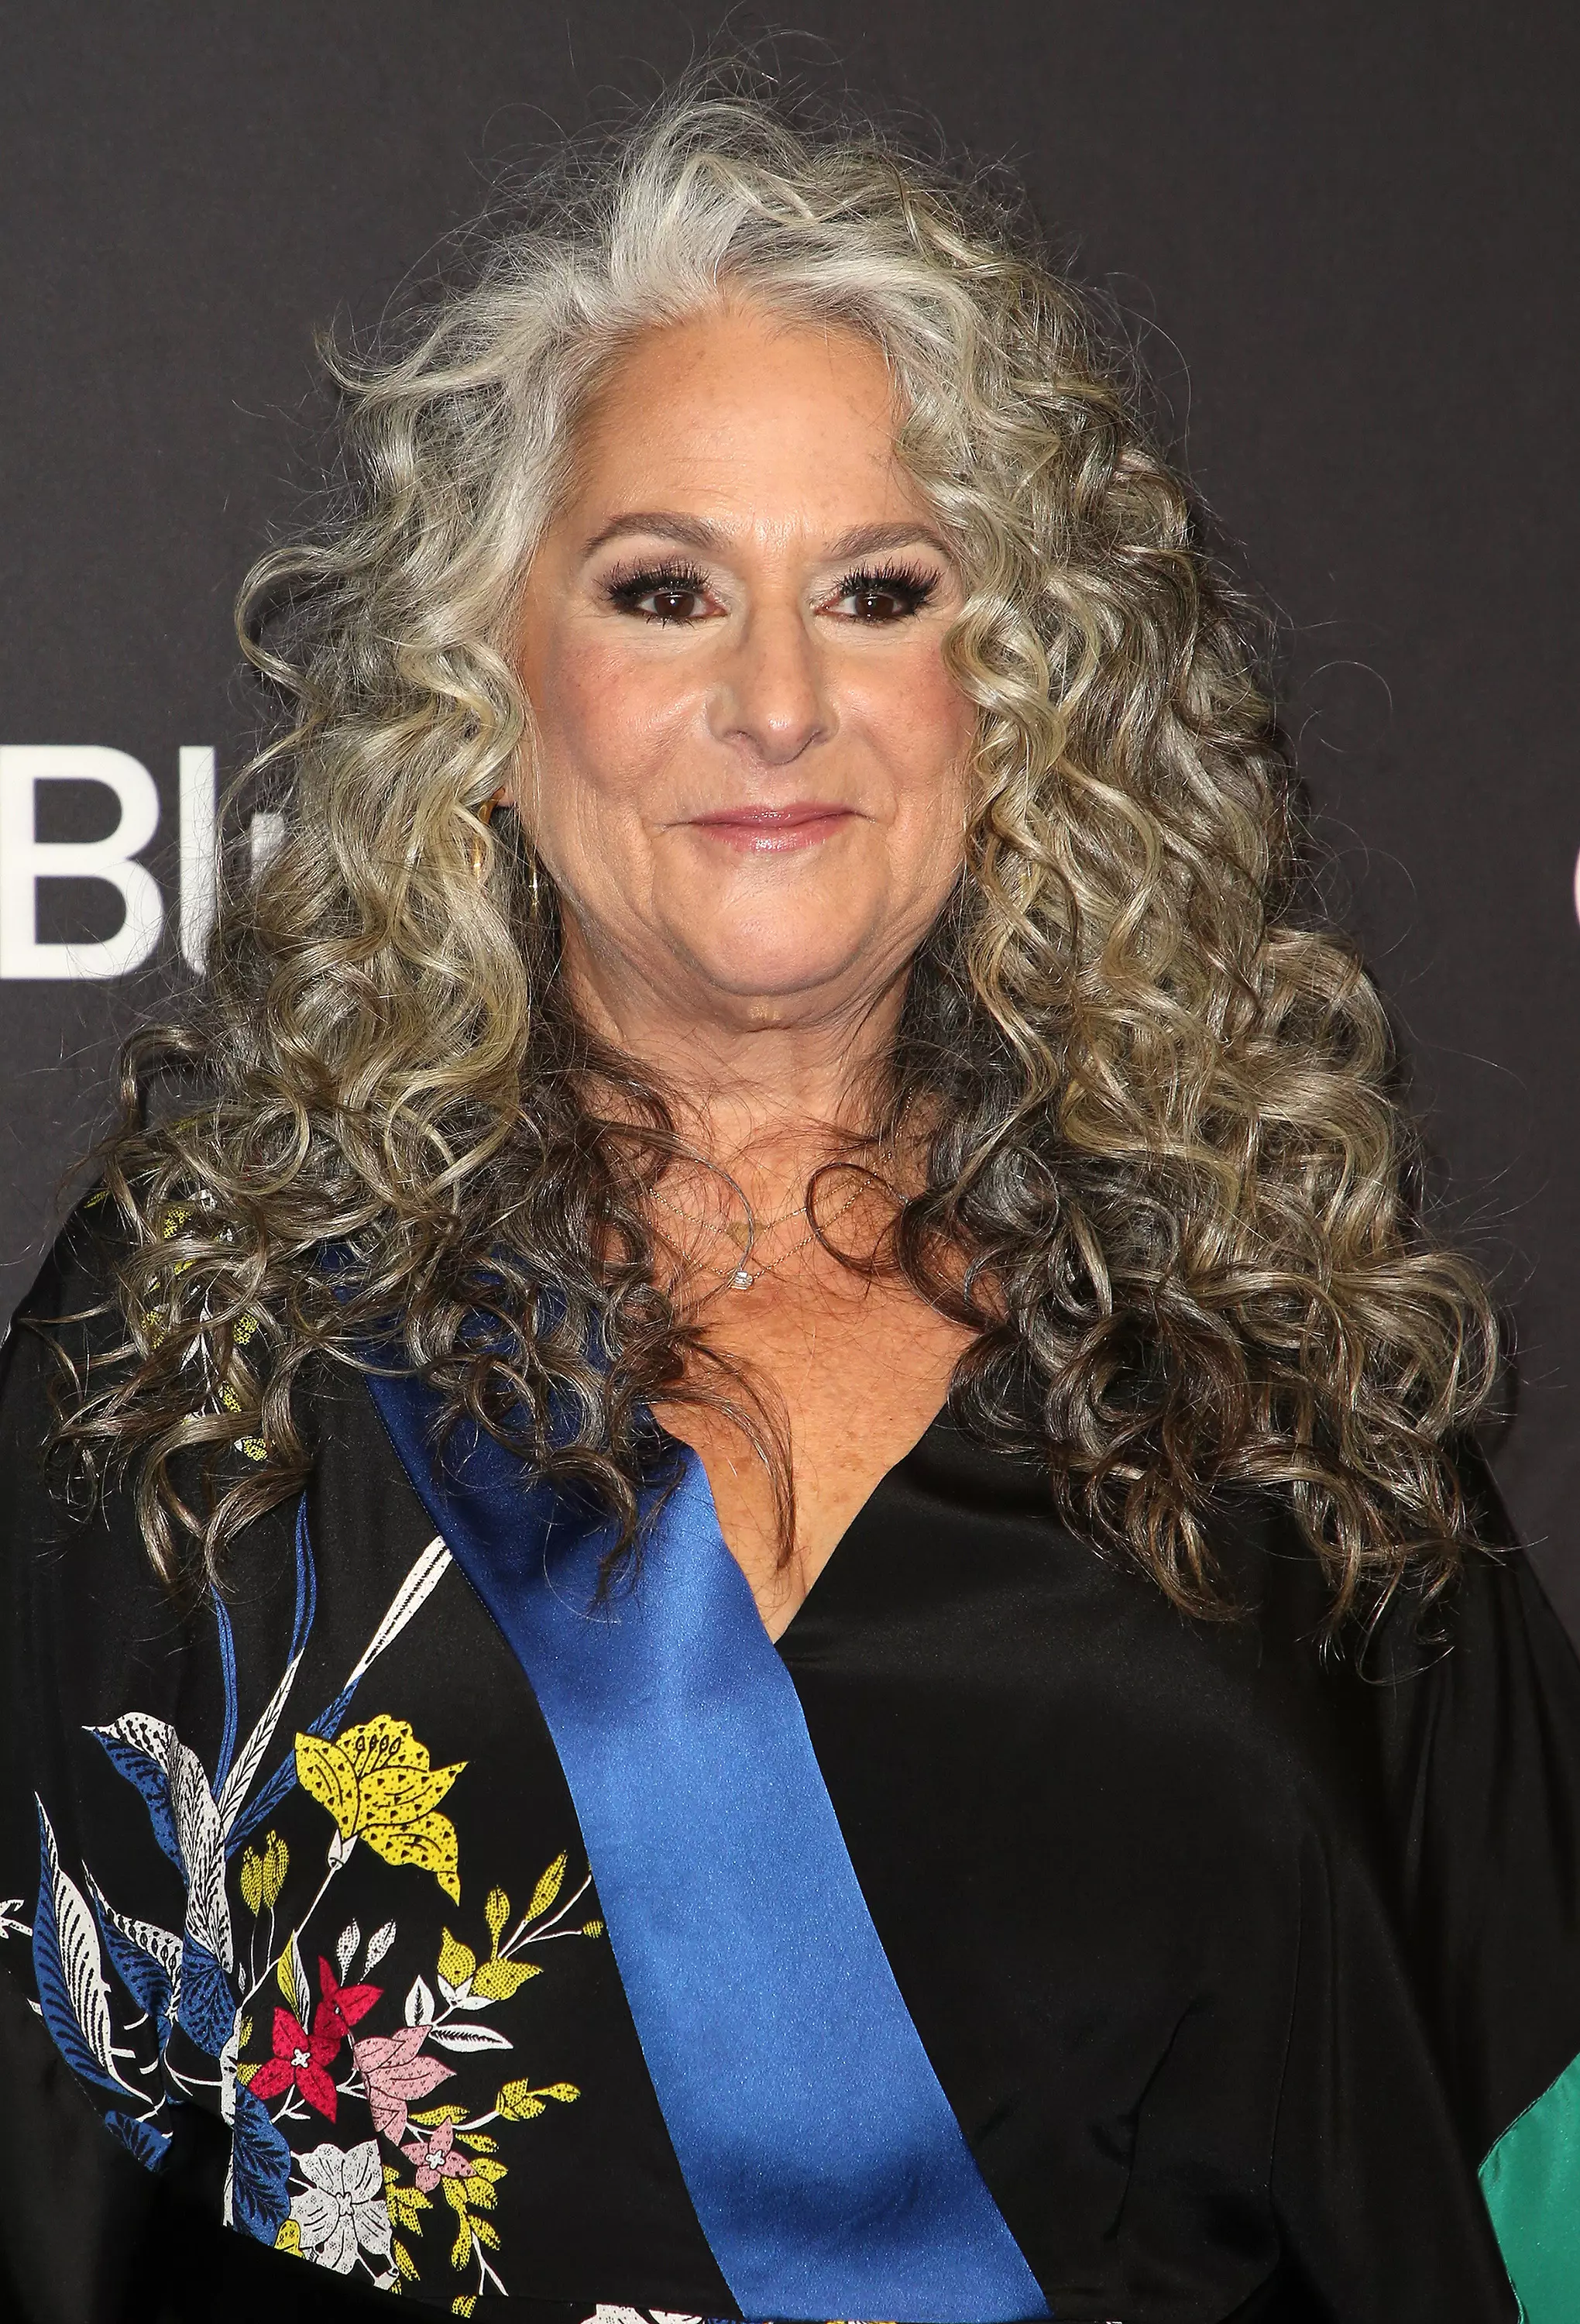 Friends co-creator Marta Kauffman has admitted she 'didn't do enough' to promote diversity on her shows.